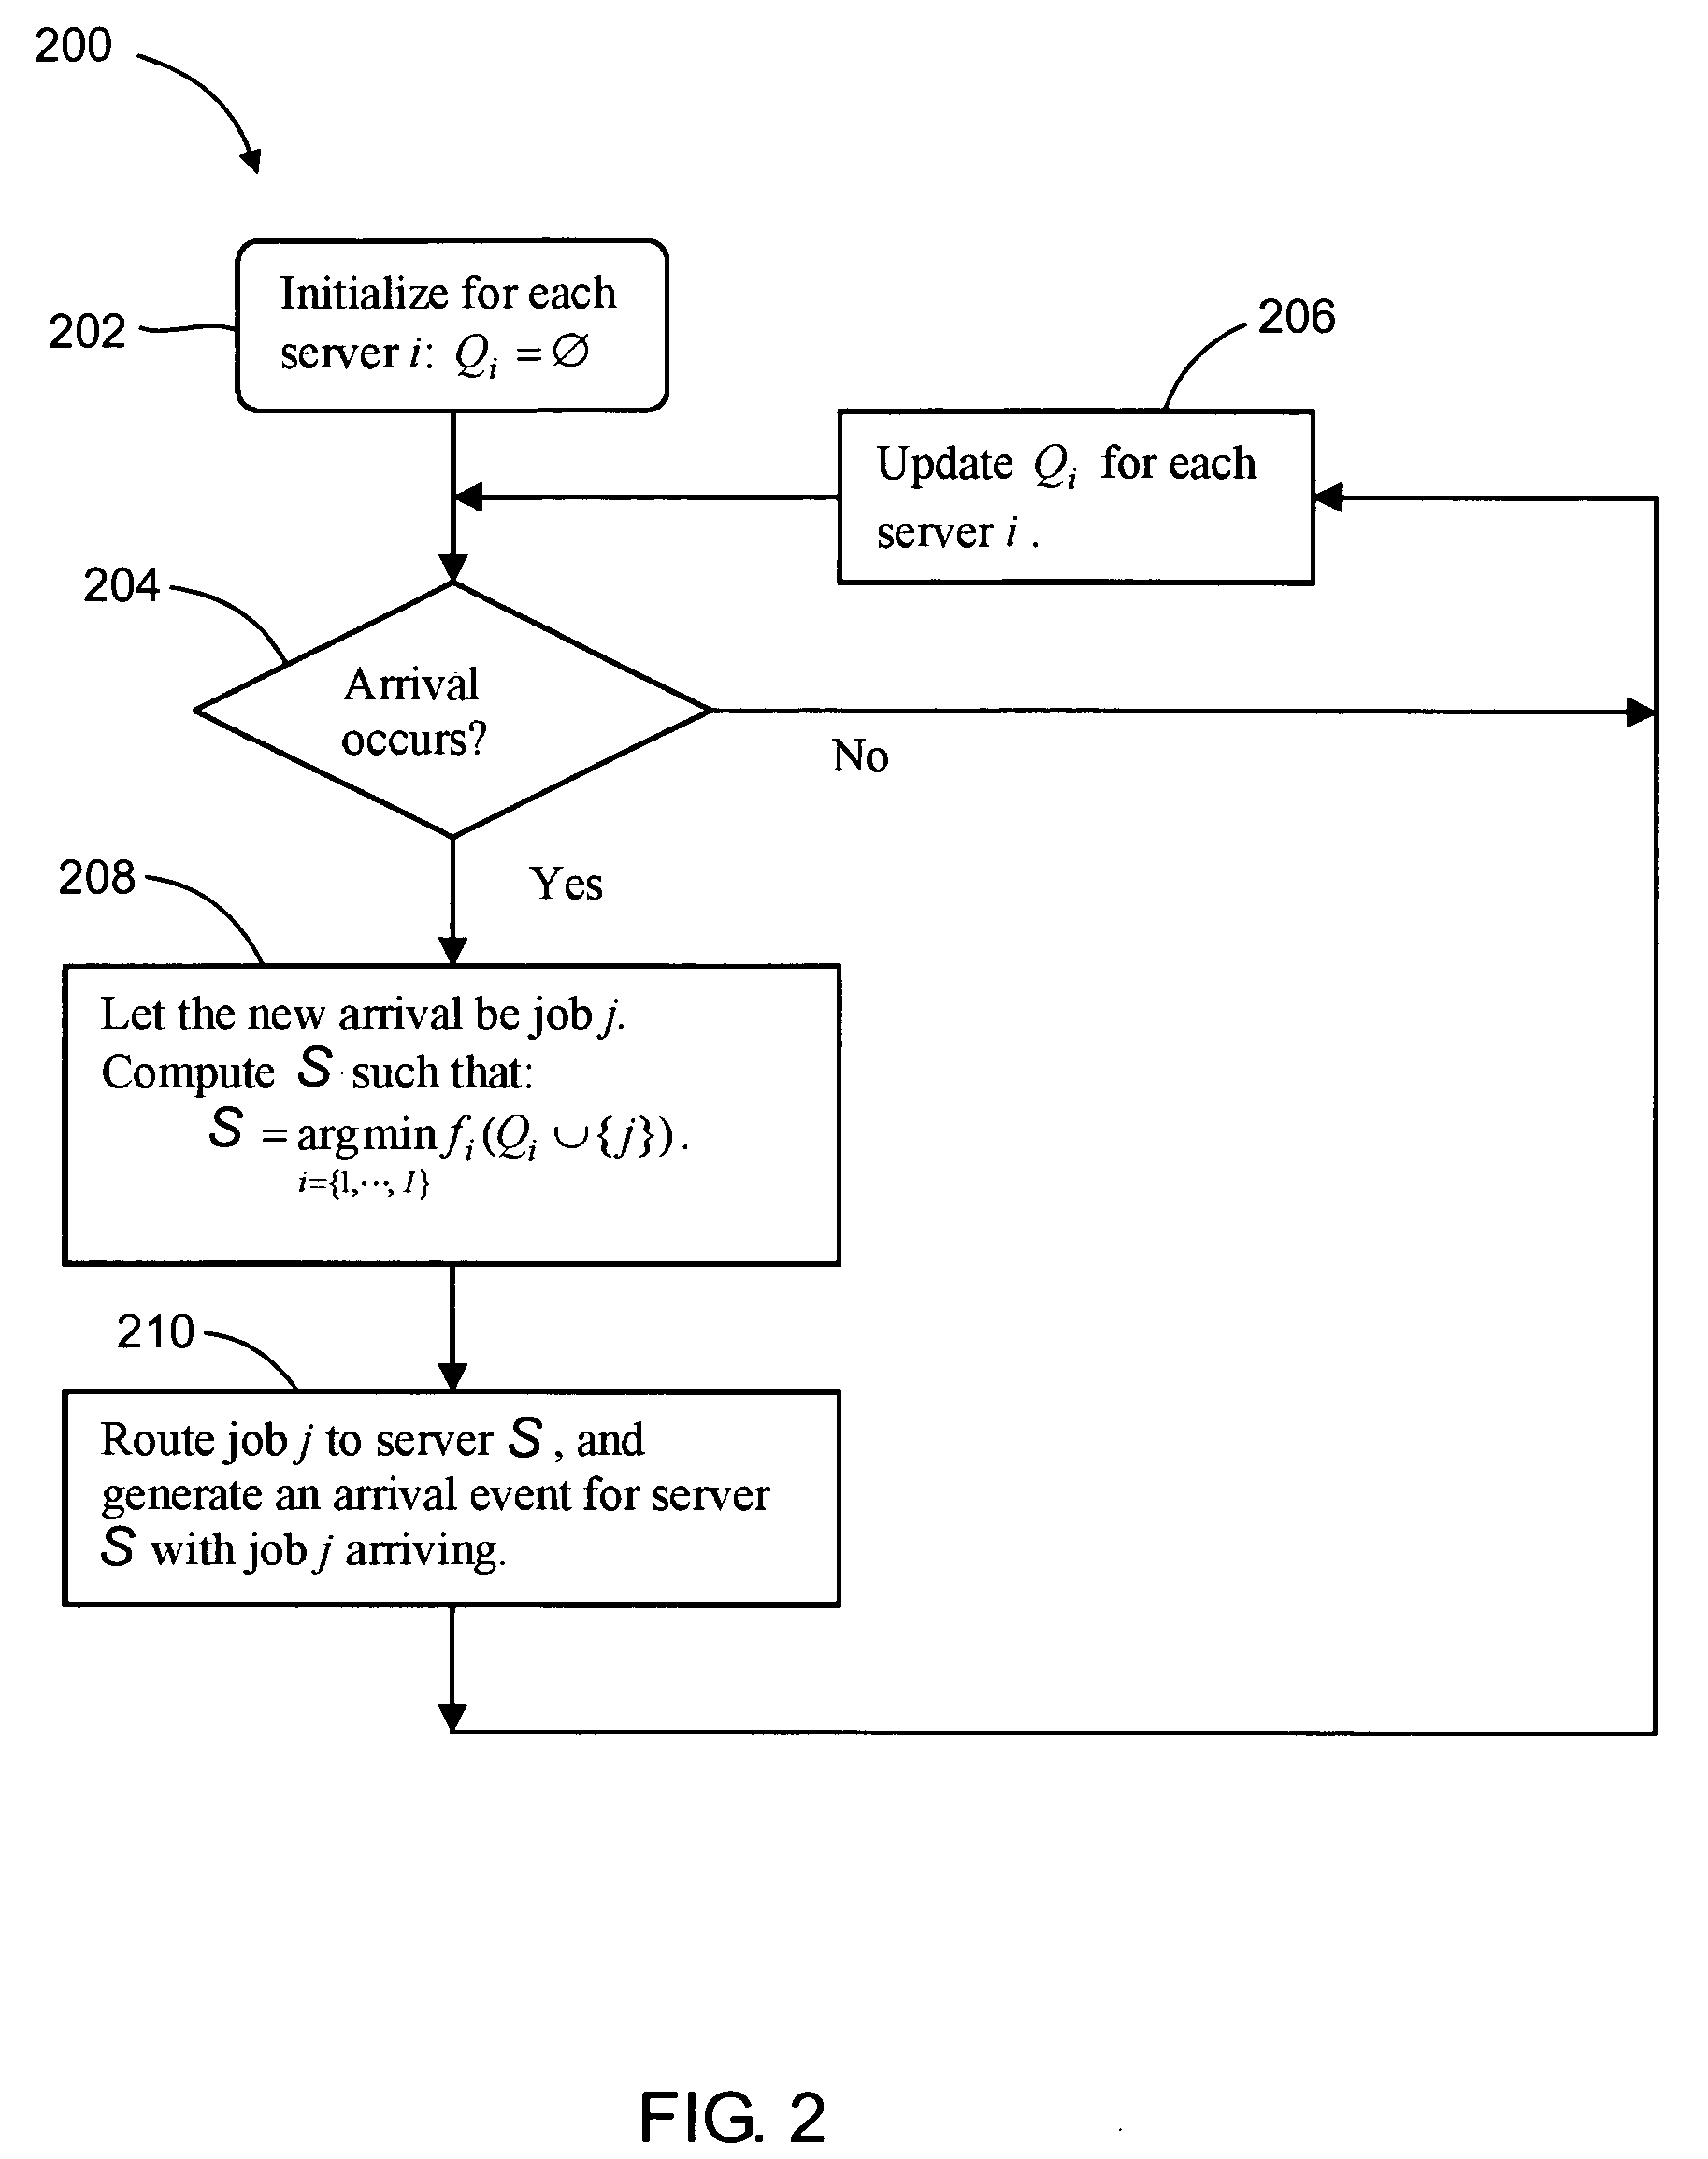 Method and apparatus for on-demand resource allocation and job management